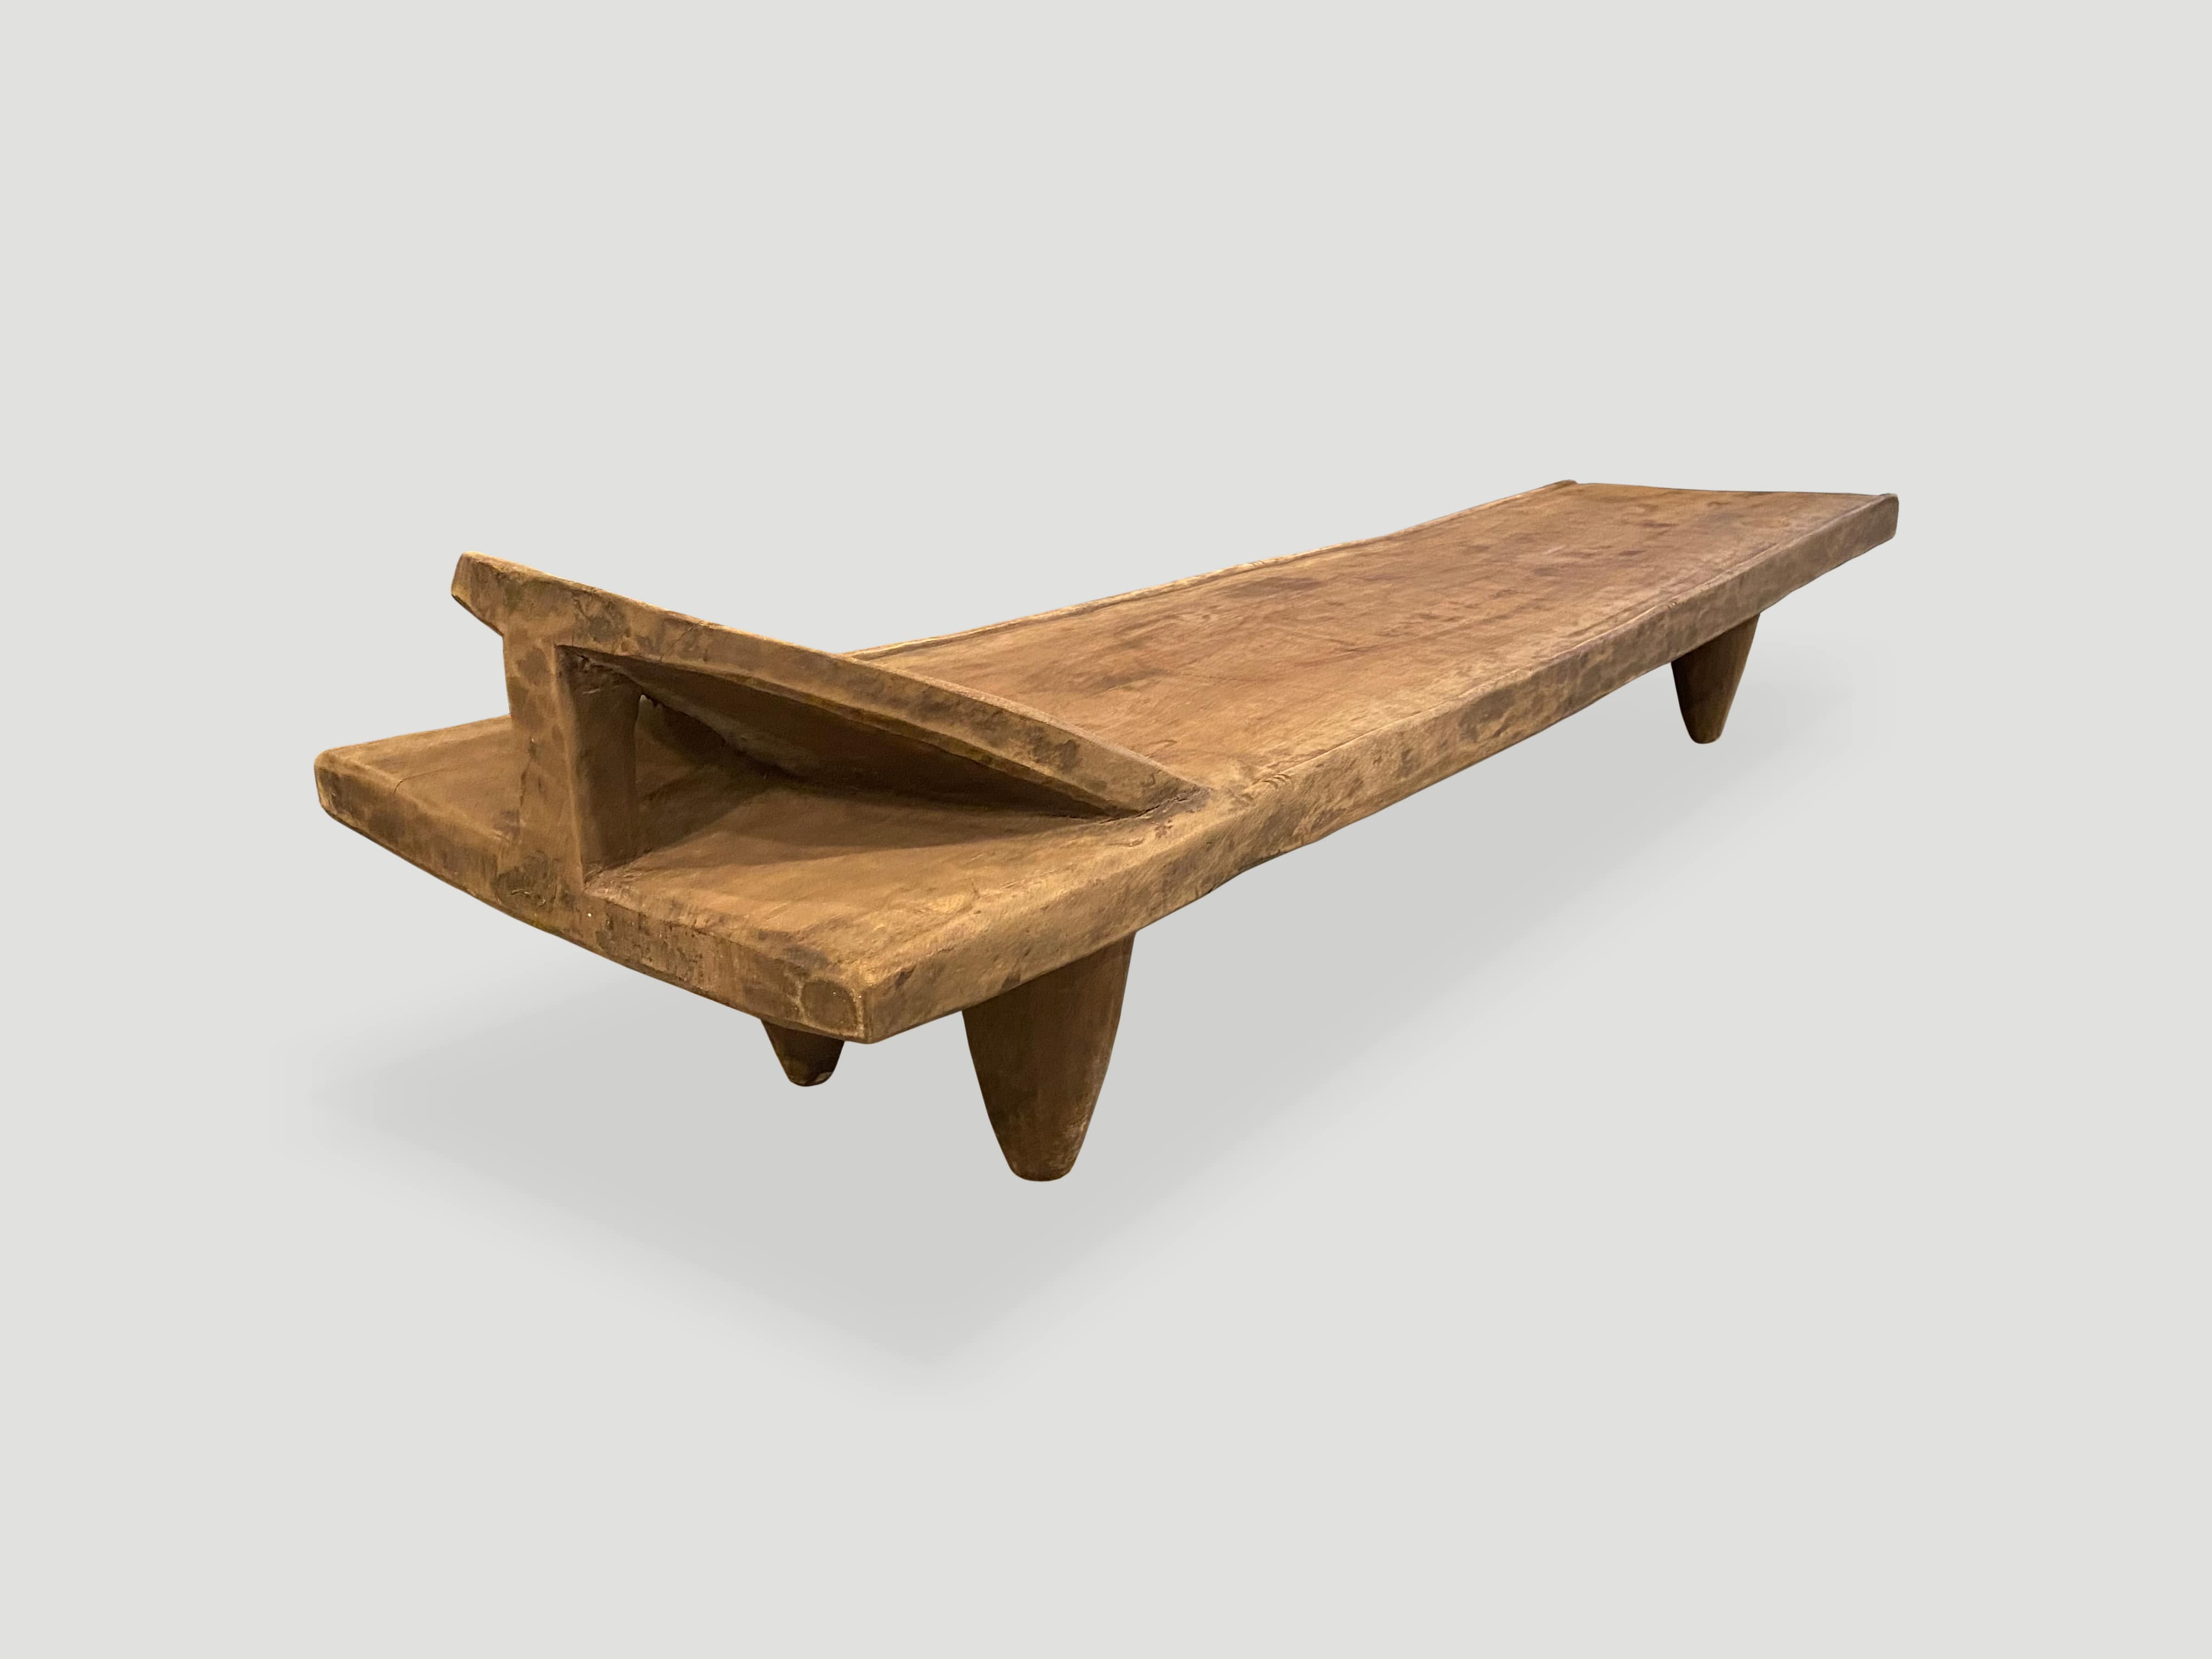 Cote d’Ivoire Senufu Day Bed, Bench or coffee table